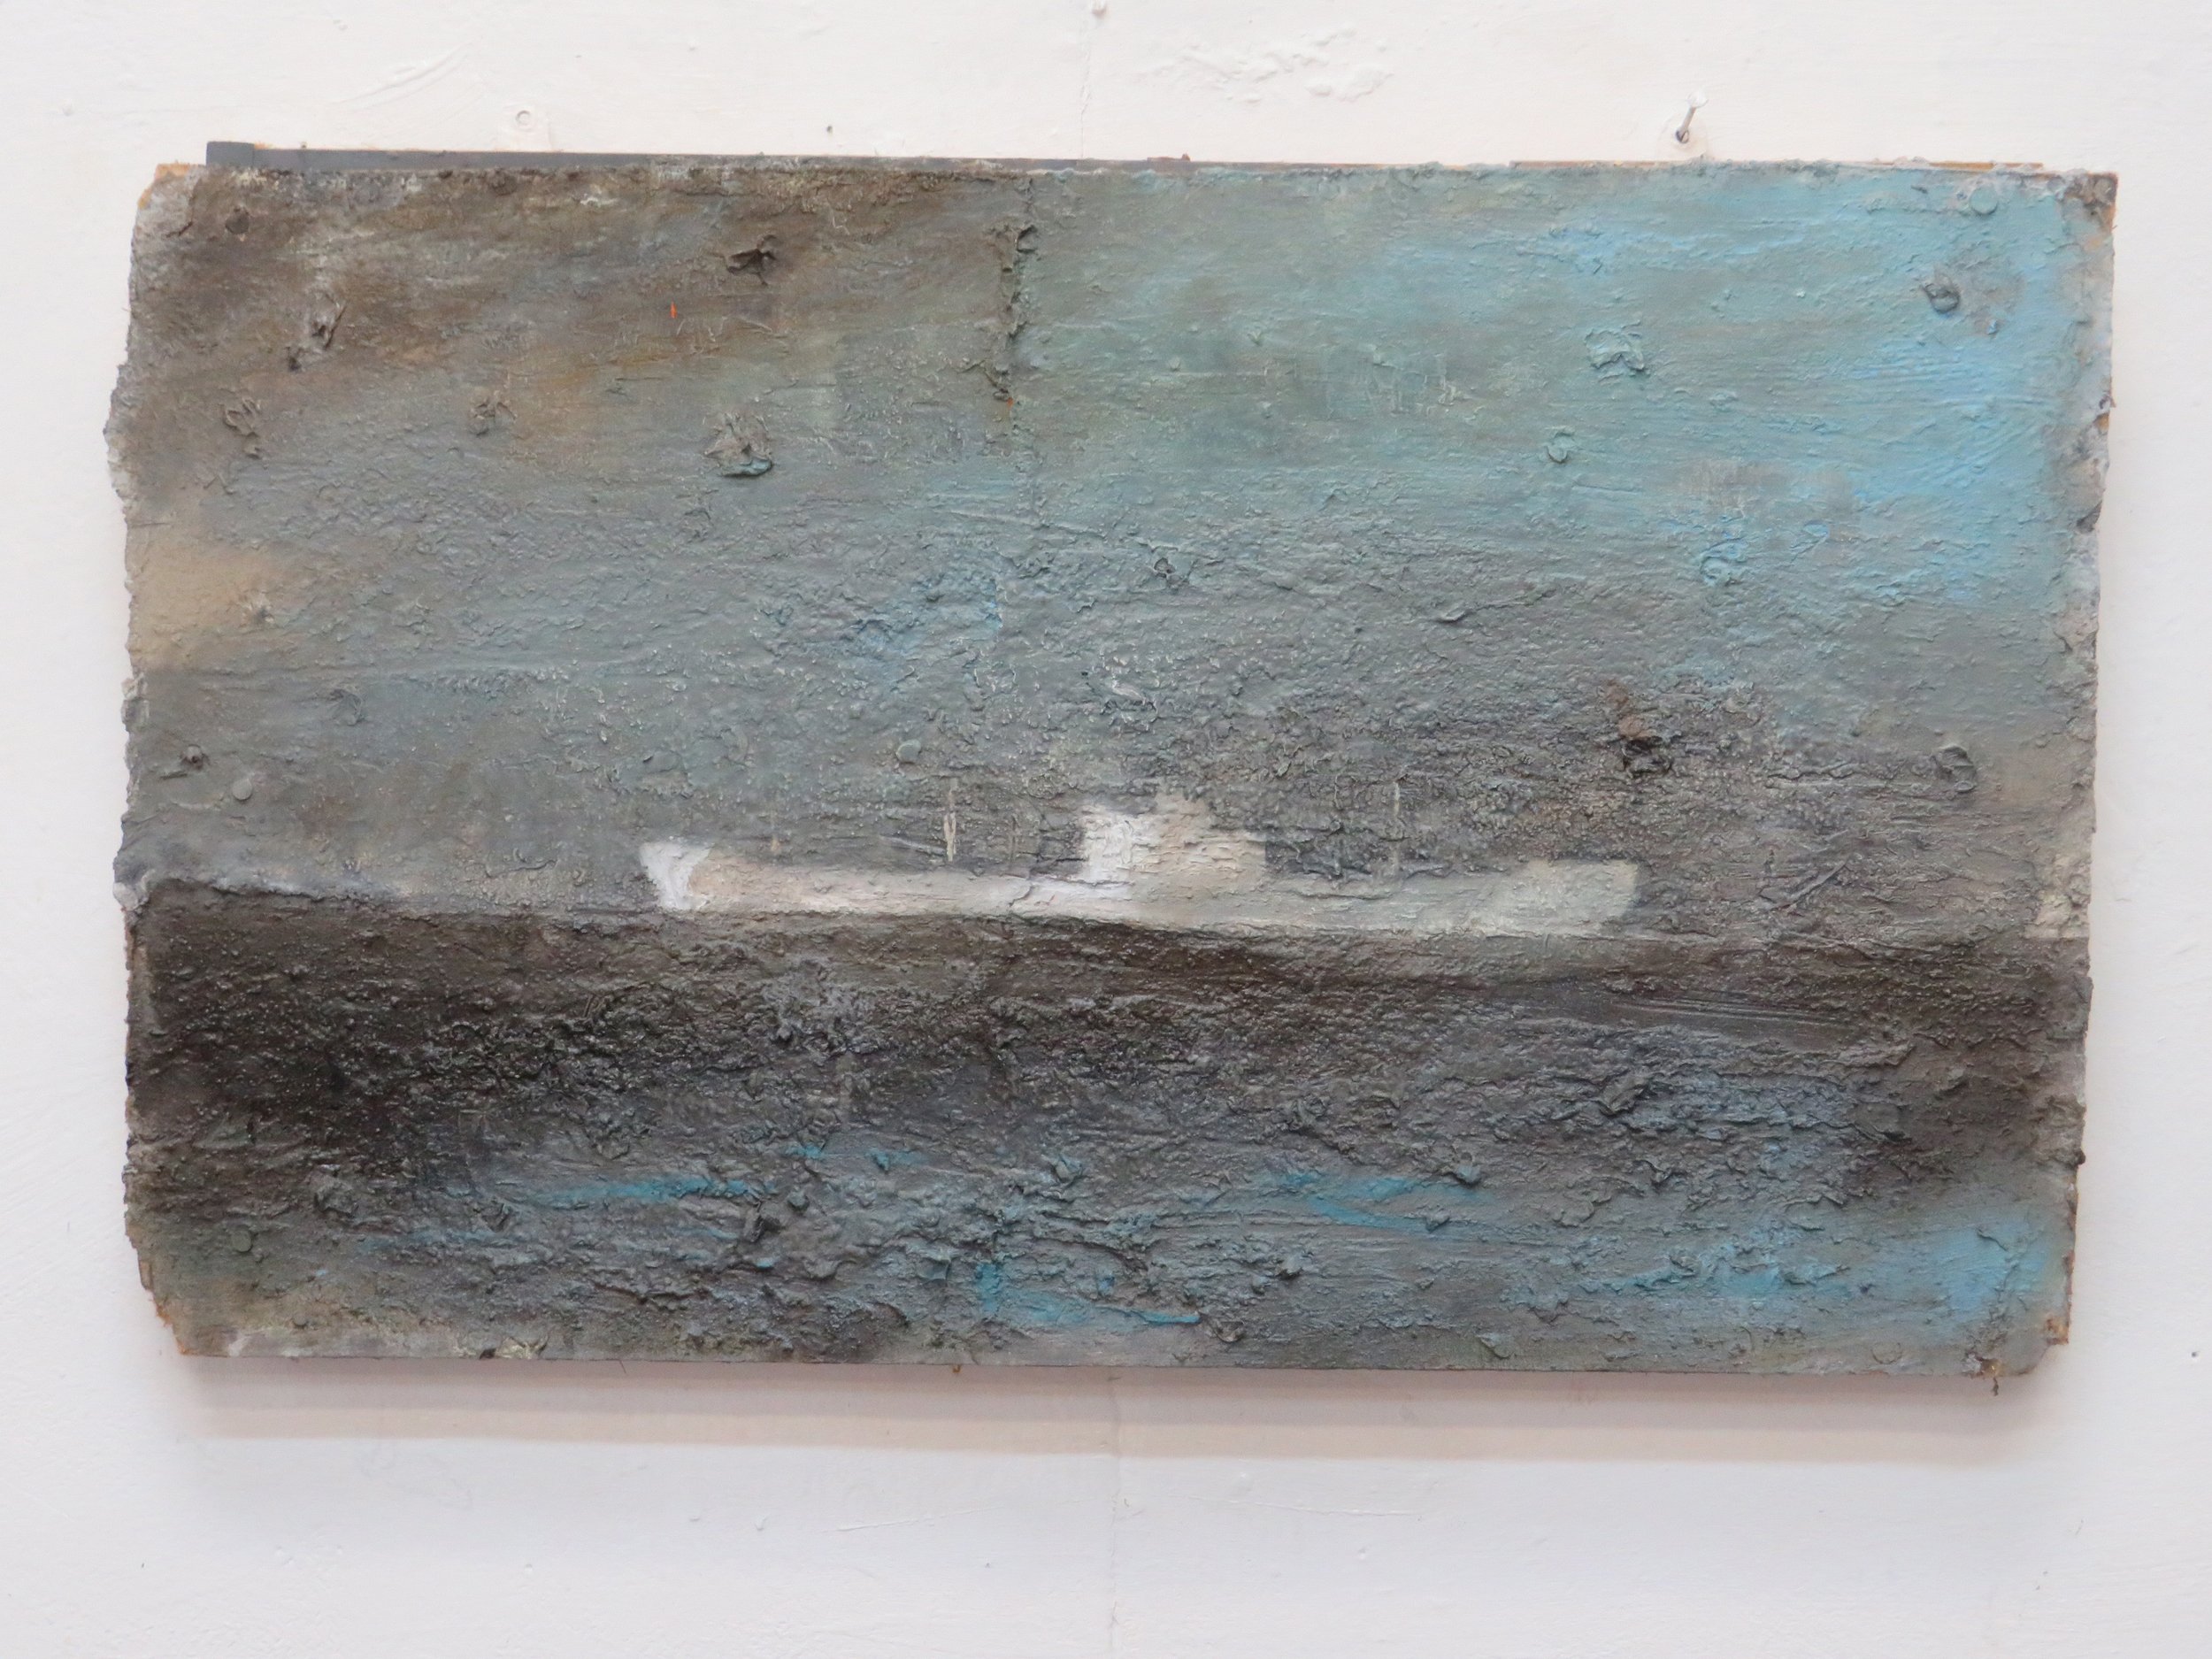 Ghost Ship off Avonmouth 47 x 78 cms